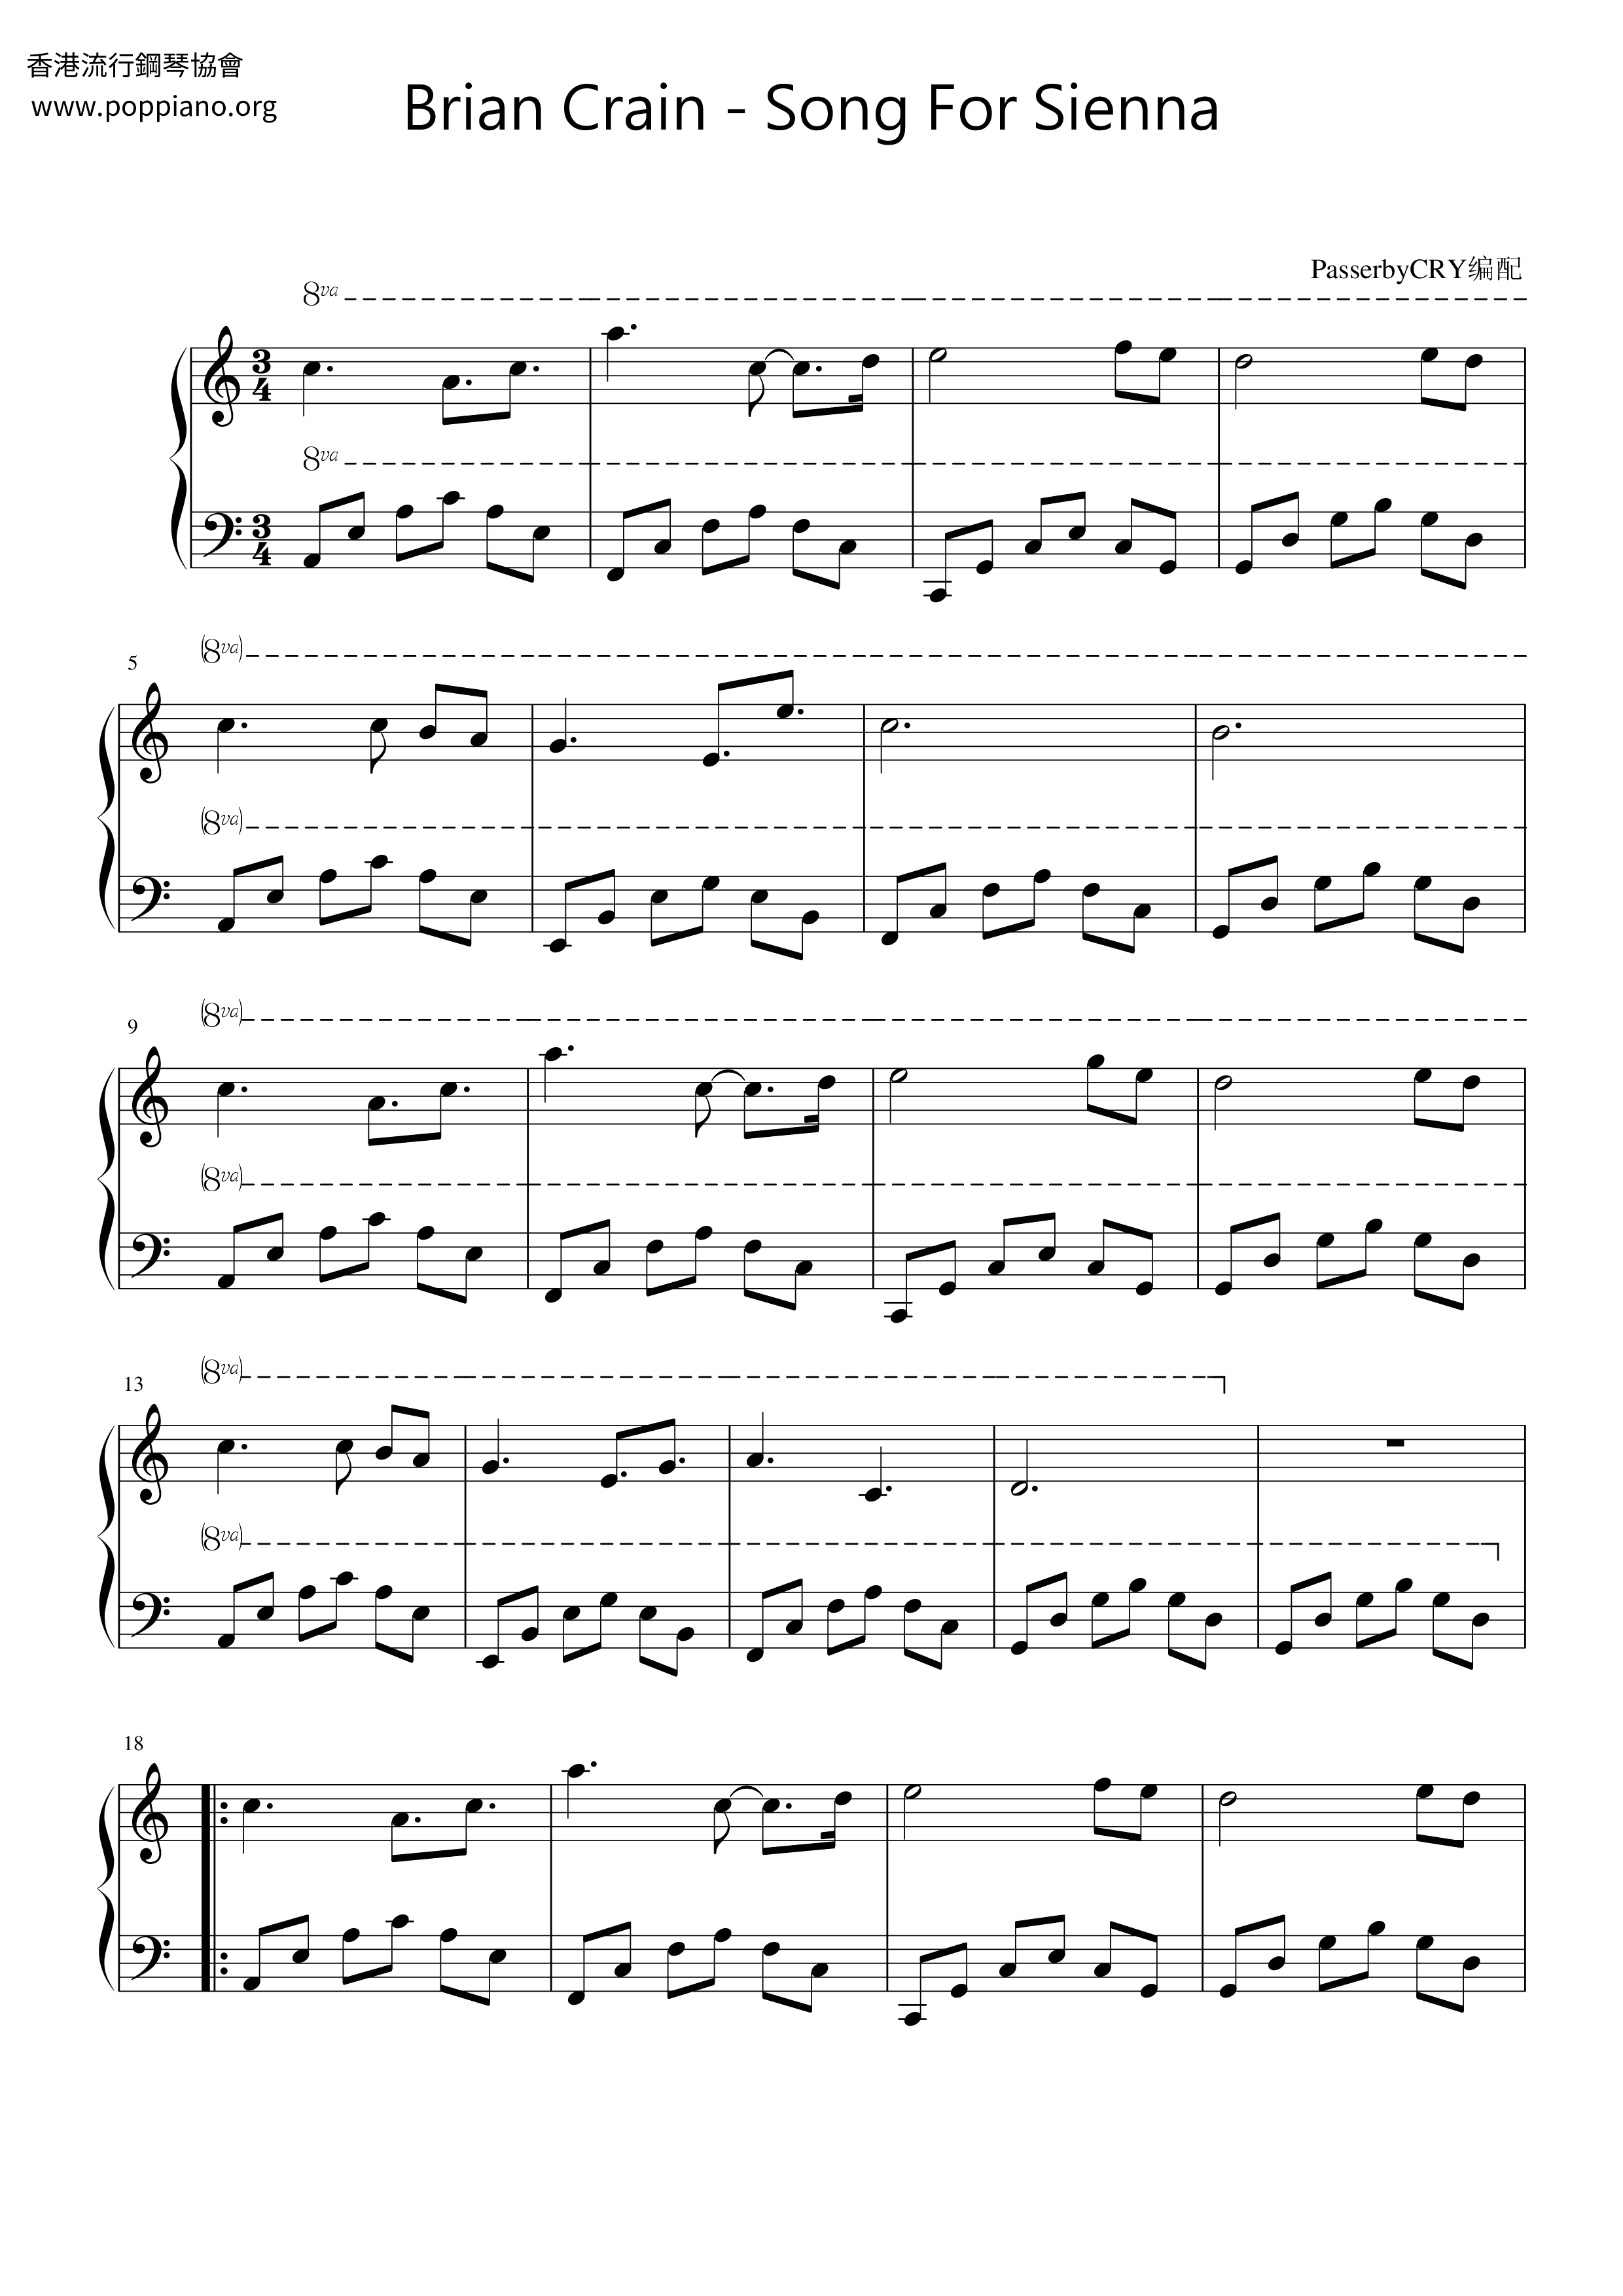 Song For Sienna Score